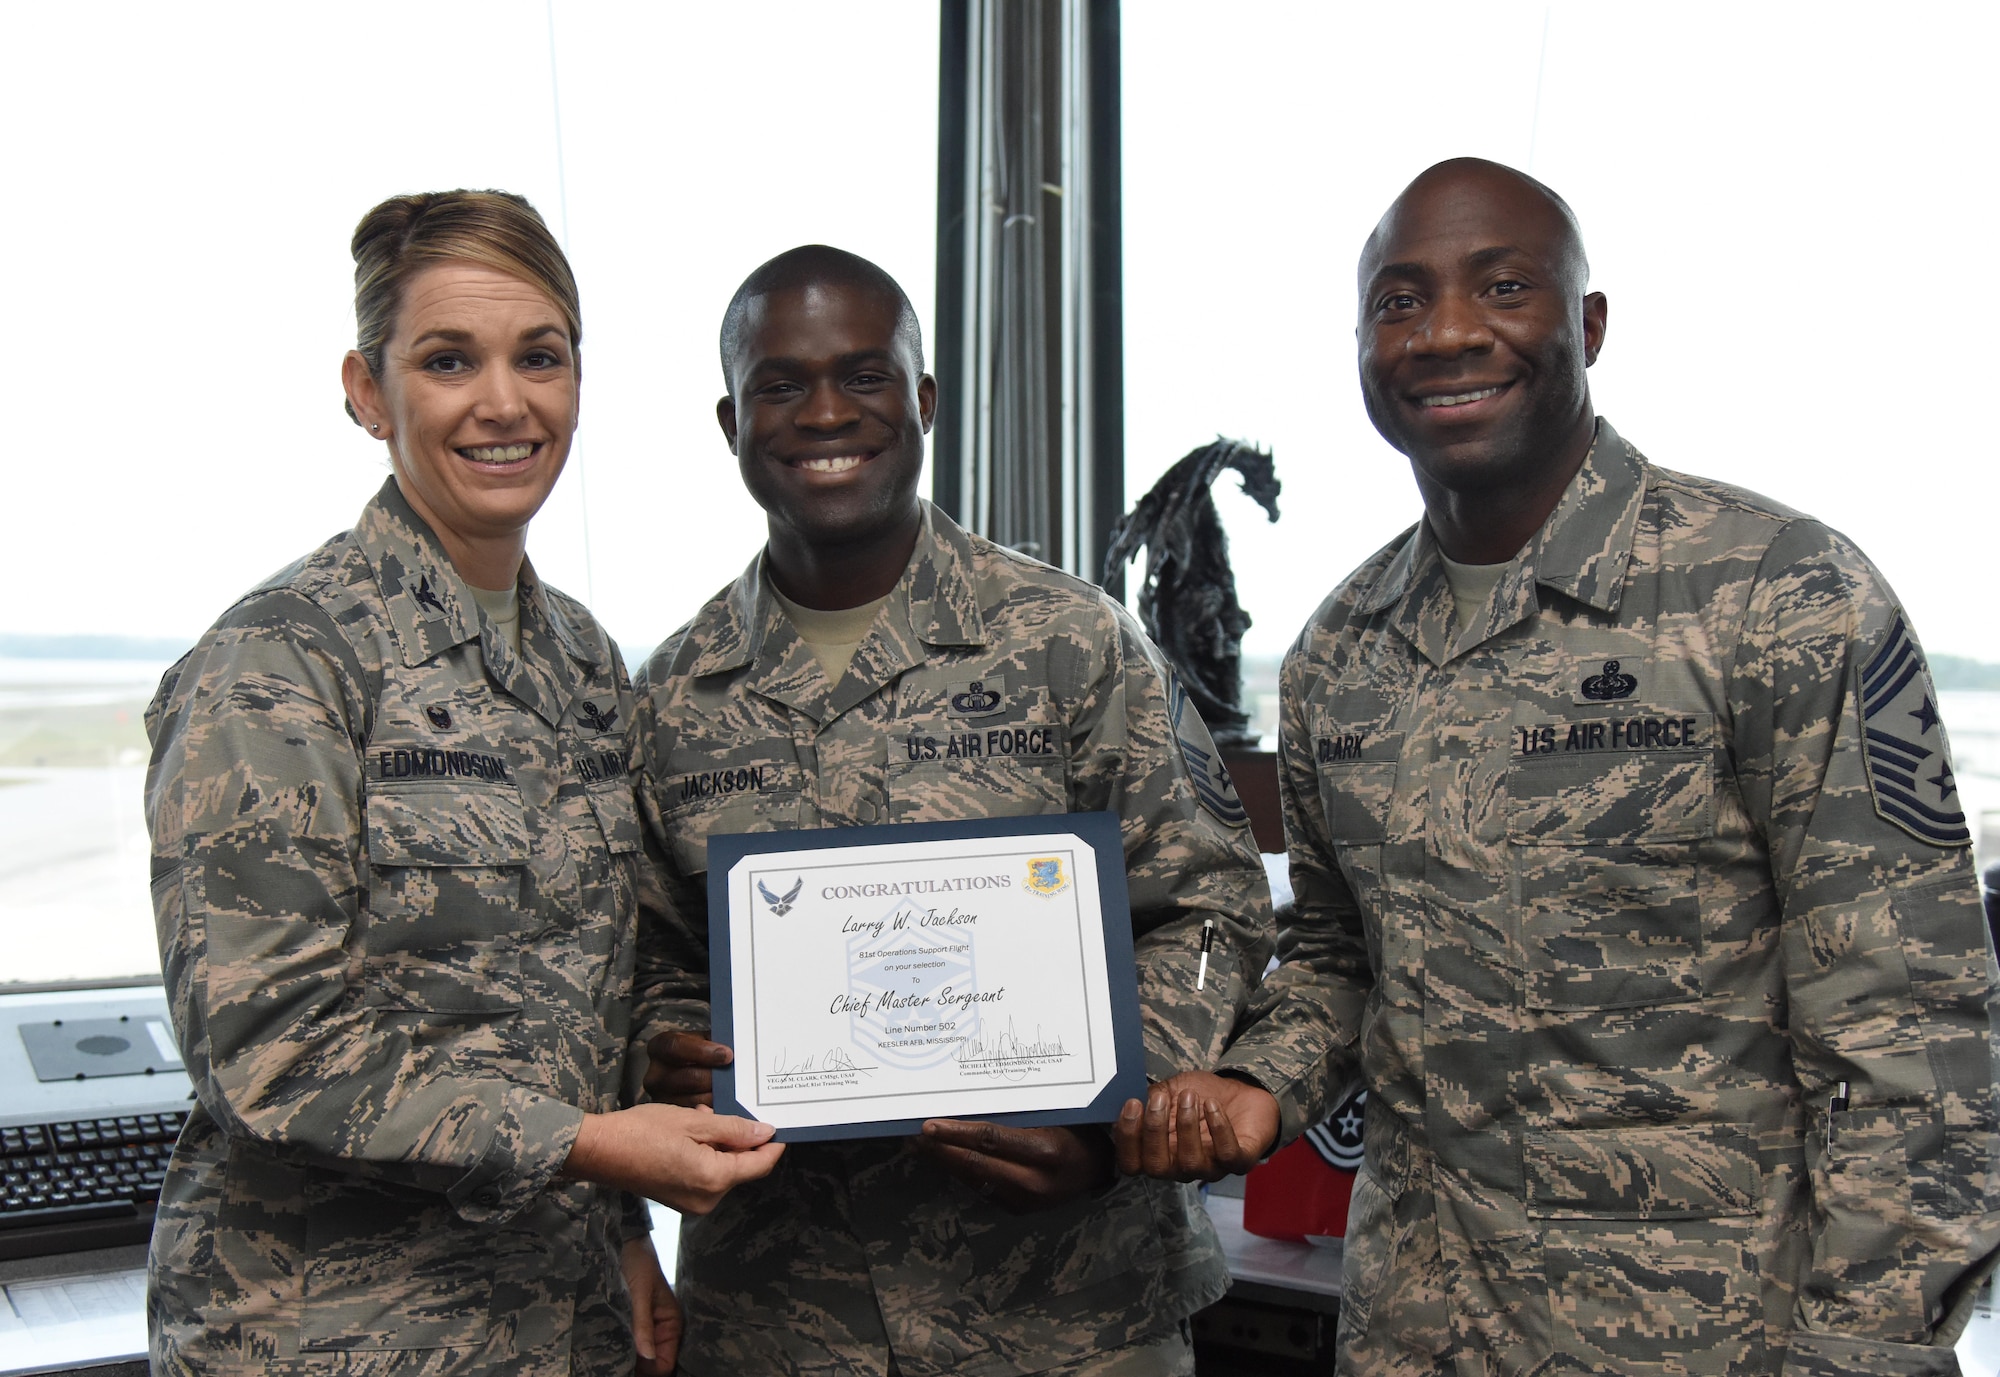 Col. Michele Edmondson, 81st Training Wing commander, and Chief Master Sgt. Vegas Clark, 81st TRW command chief, congratulate Senior Master Sgt. Larry Jackson, 81st Operations Support Flight superintendent, on his selection to chief master sergeant at the air traffic control tower Dec. 14, 2016, on Keesler Air Force Base, Miss. Base leadership visited the work centers of three Keesler senior NCOs to recognize and congratulate them for their selection to join the top 1 percent of the Air Force’s enlisted force. (U.S. Air Force photo by Kemberly Groue)